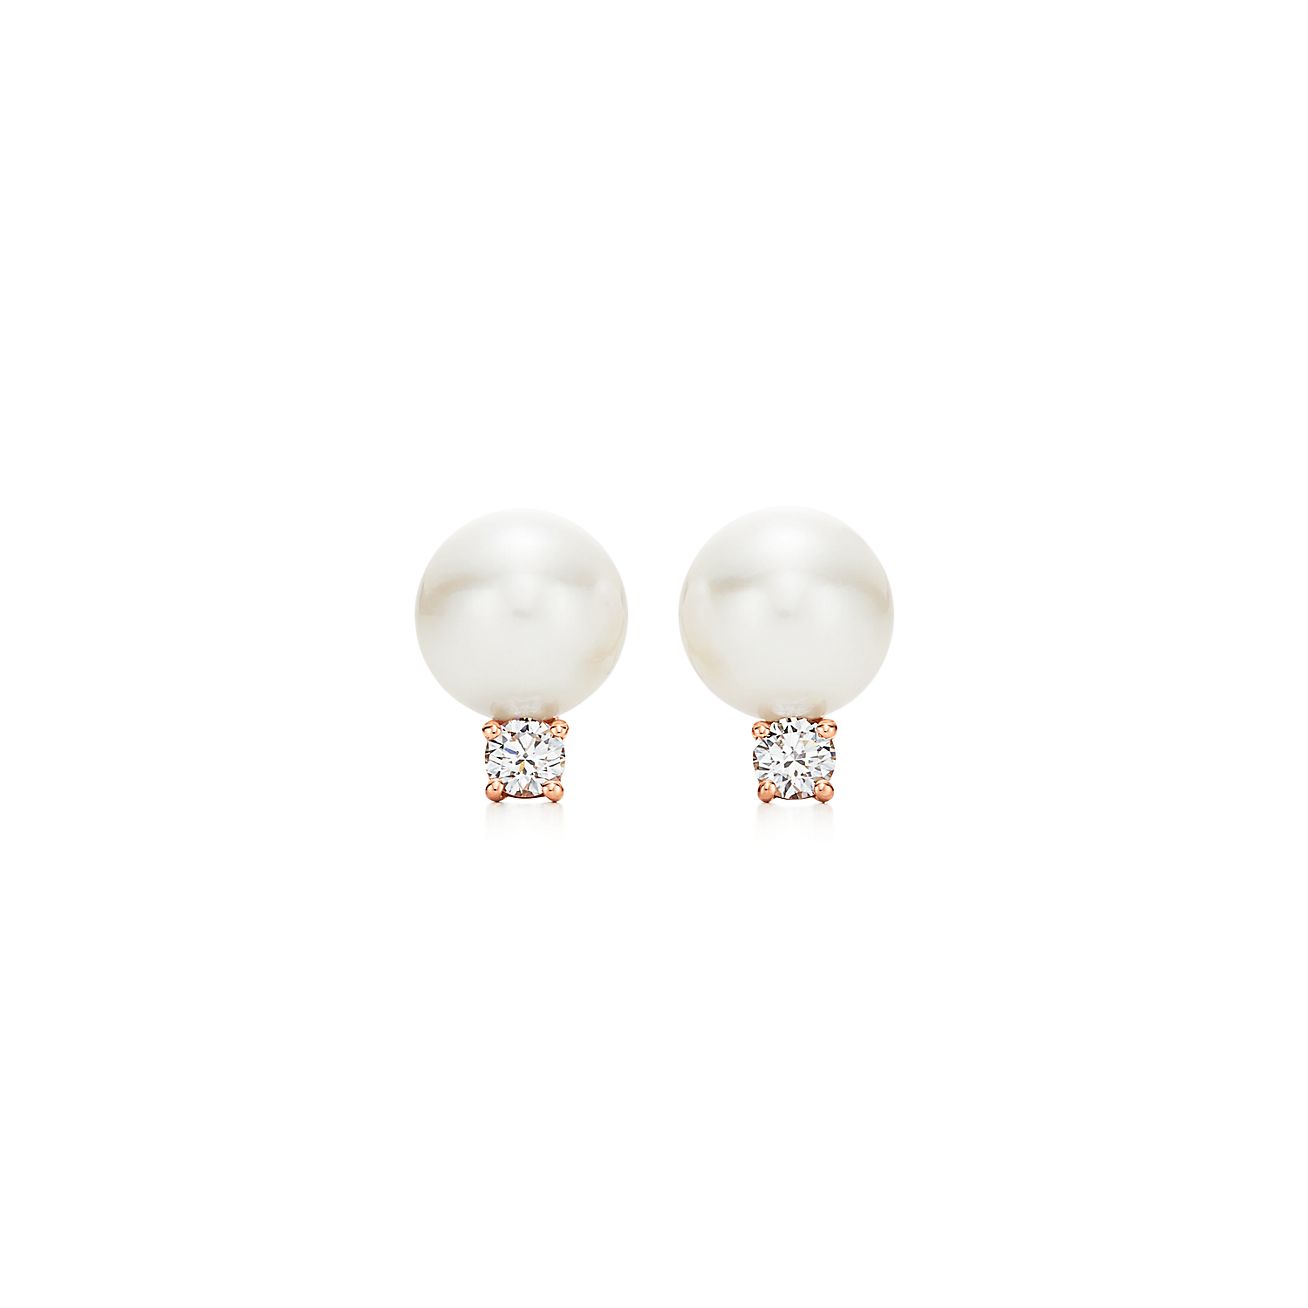 rose gold and pearl earrings